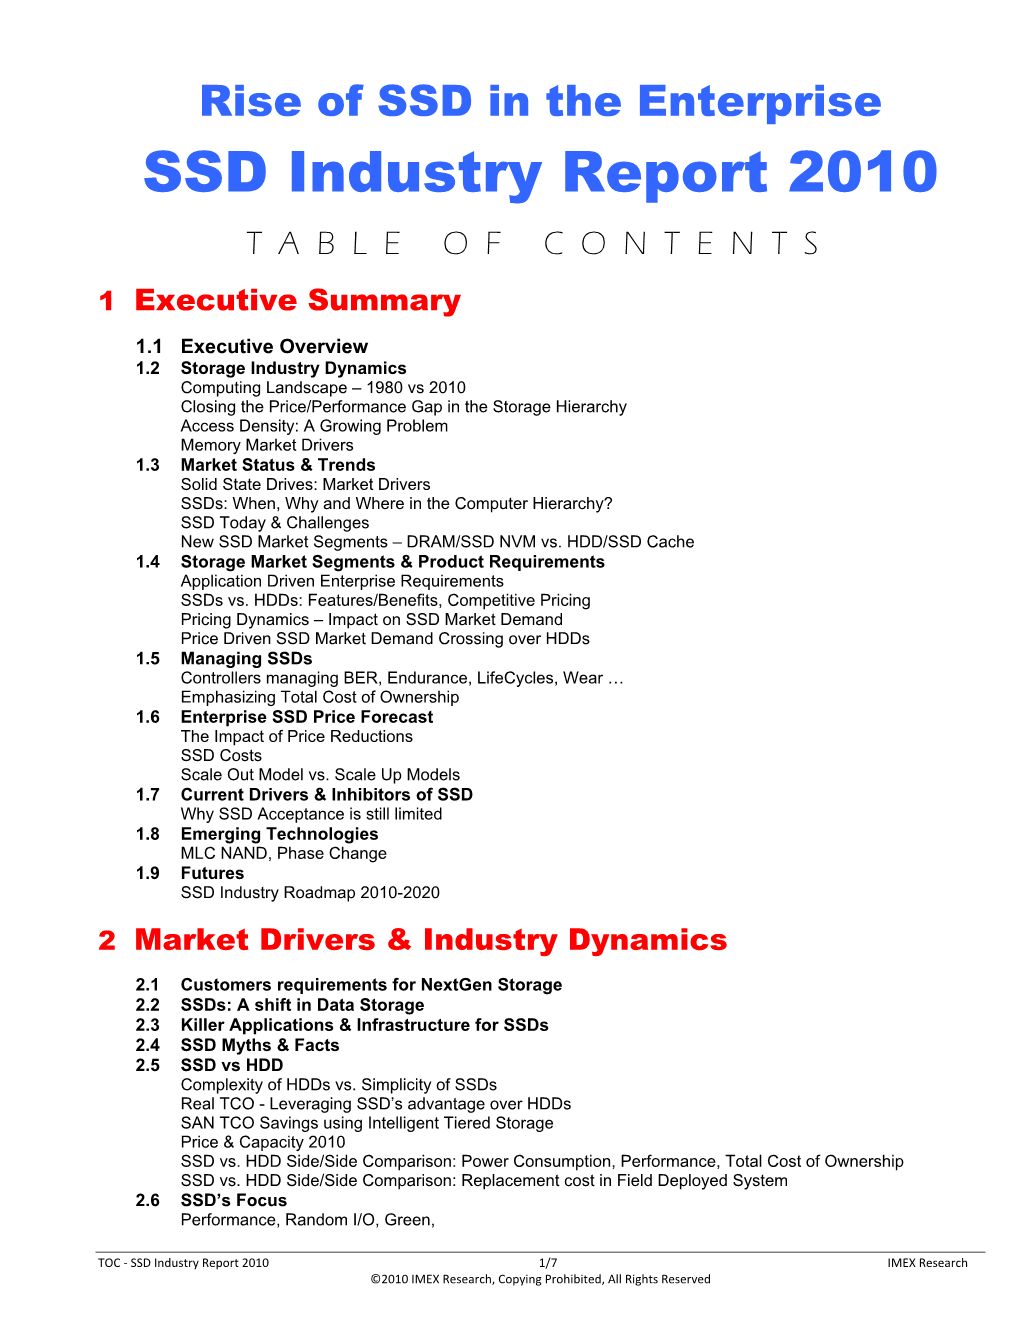 SSD Industry Report 2010